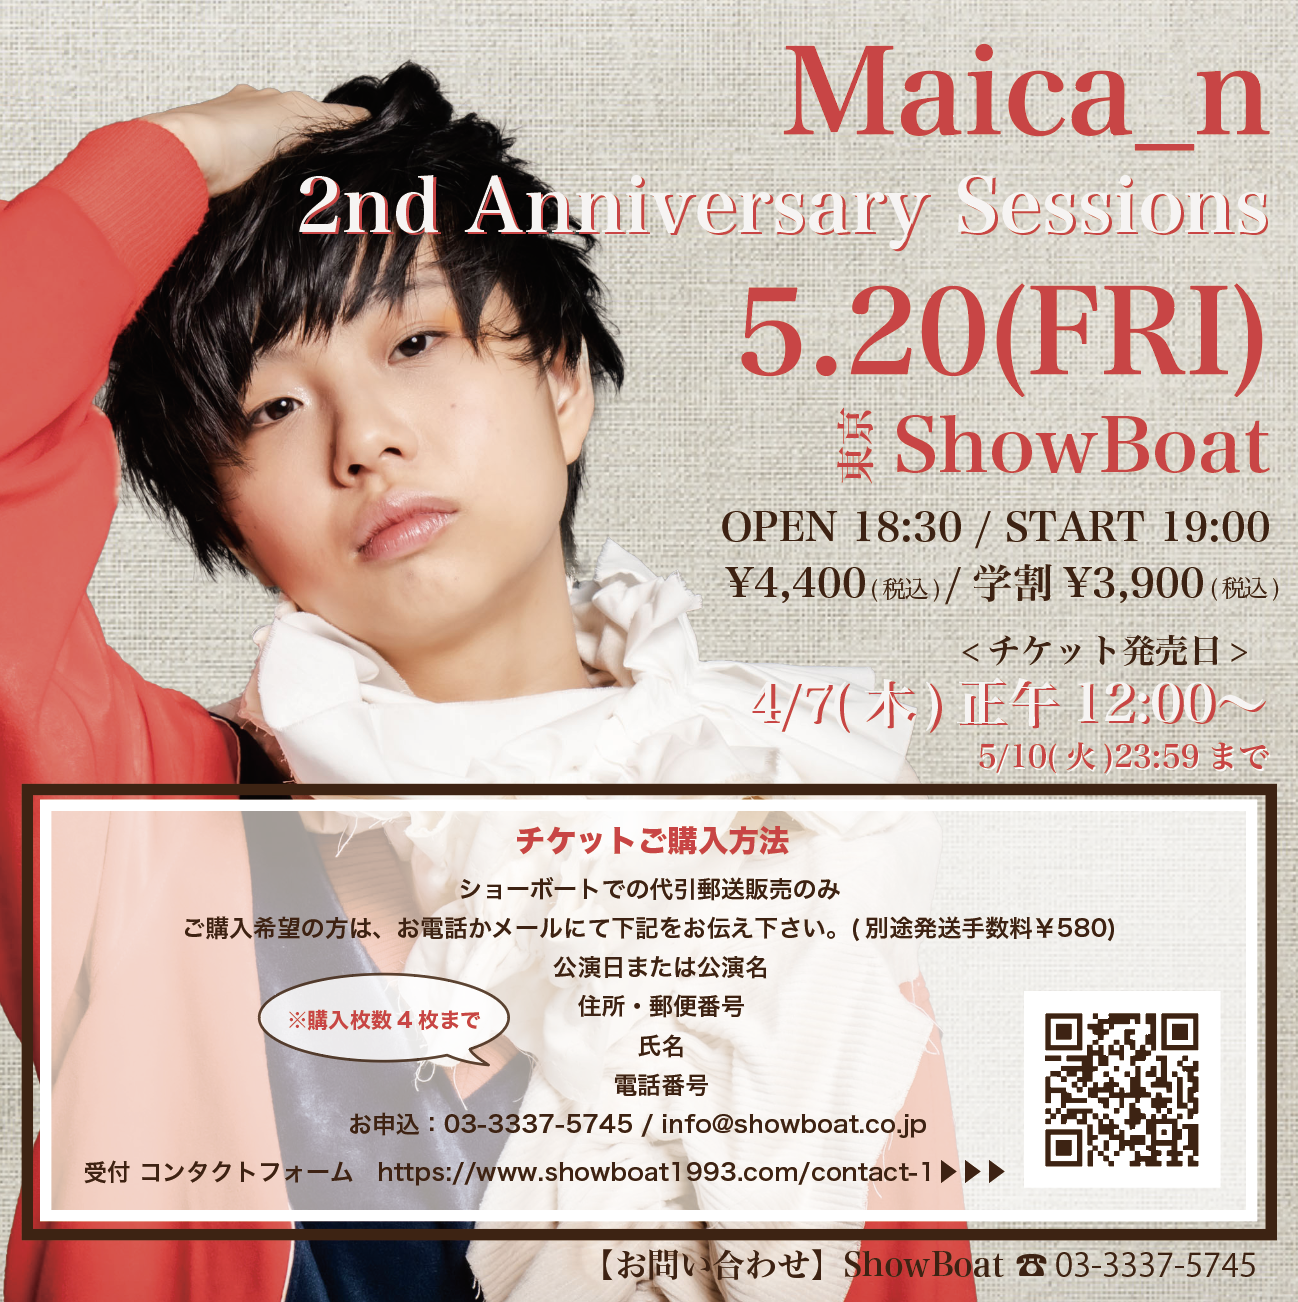 「Maica_n〜2nd Anniversary Sessions」